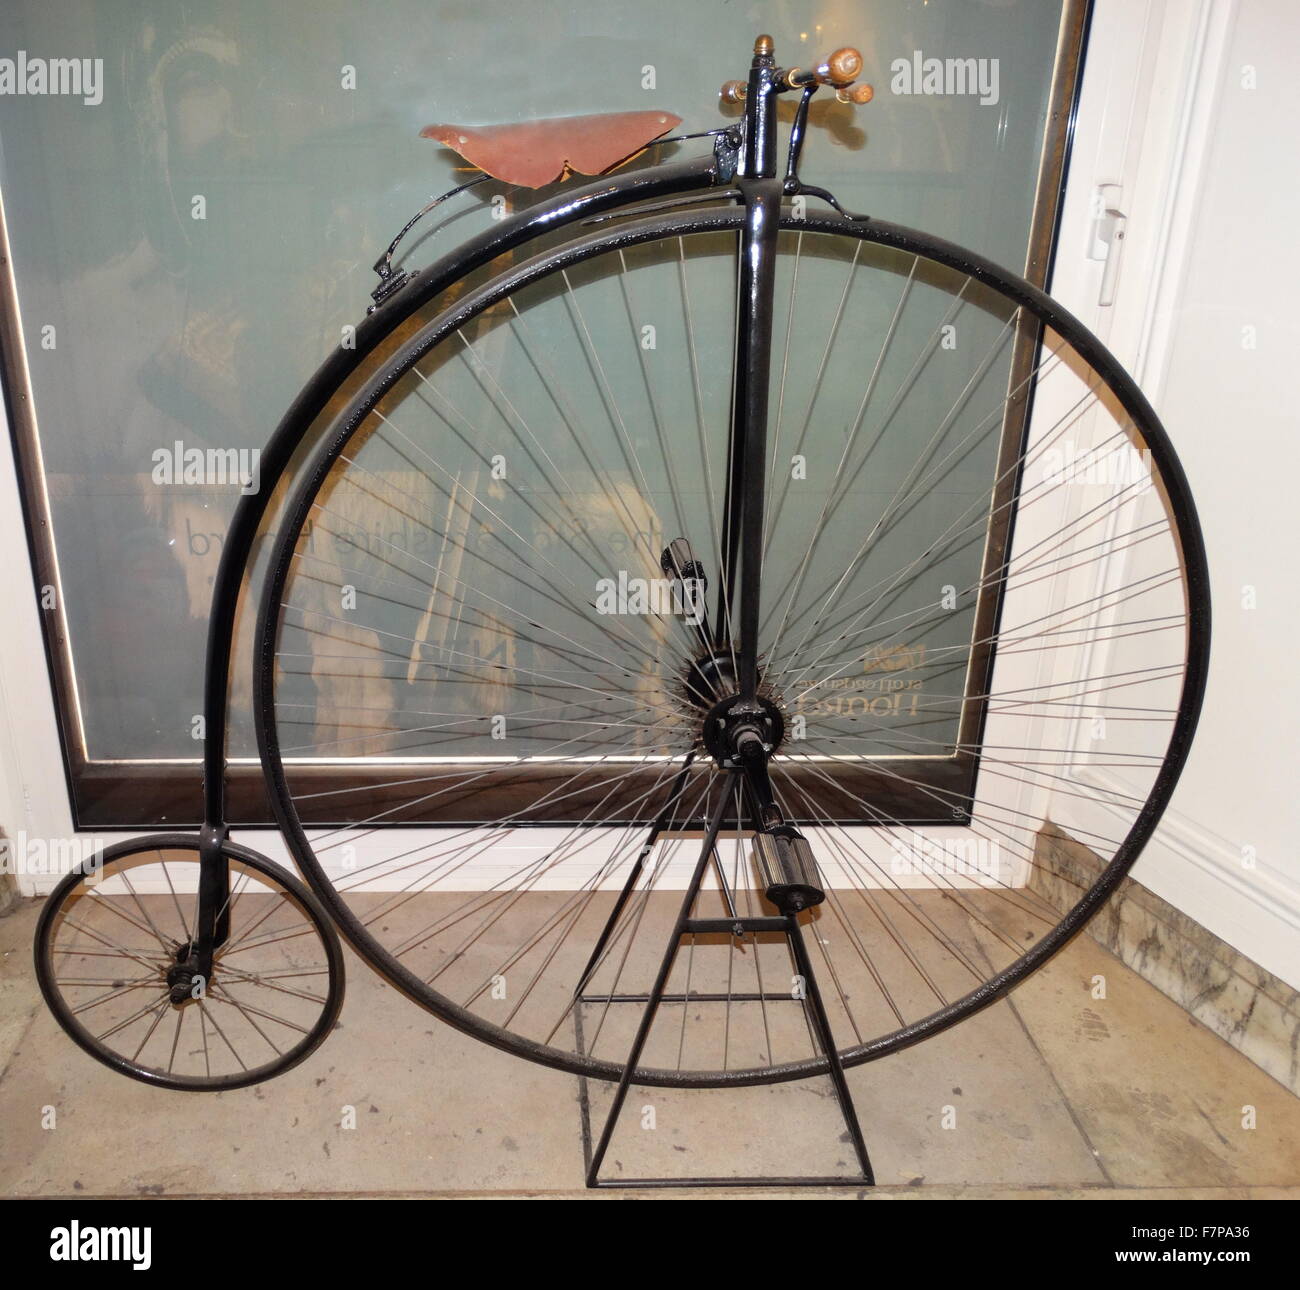 The penny-farthing, also known as a high wheel, high wheeler and ordinary, is a type of bicycle with a large front wheel and a much smaller rear wheel. It was popular after the boneshaker until the development of the safety bicycle in the 1880s Stock Photo